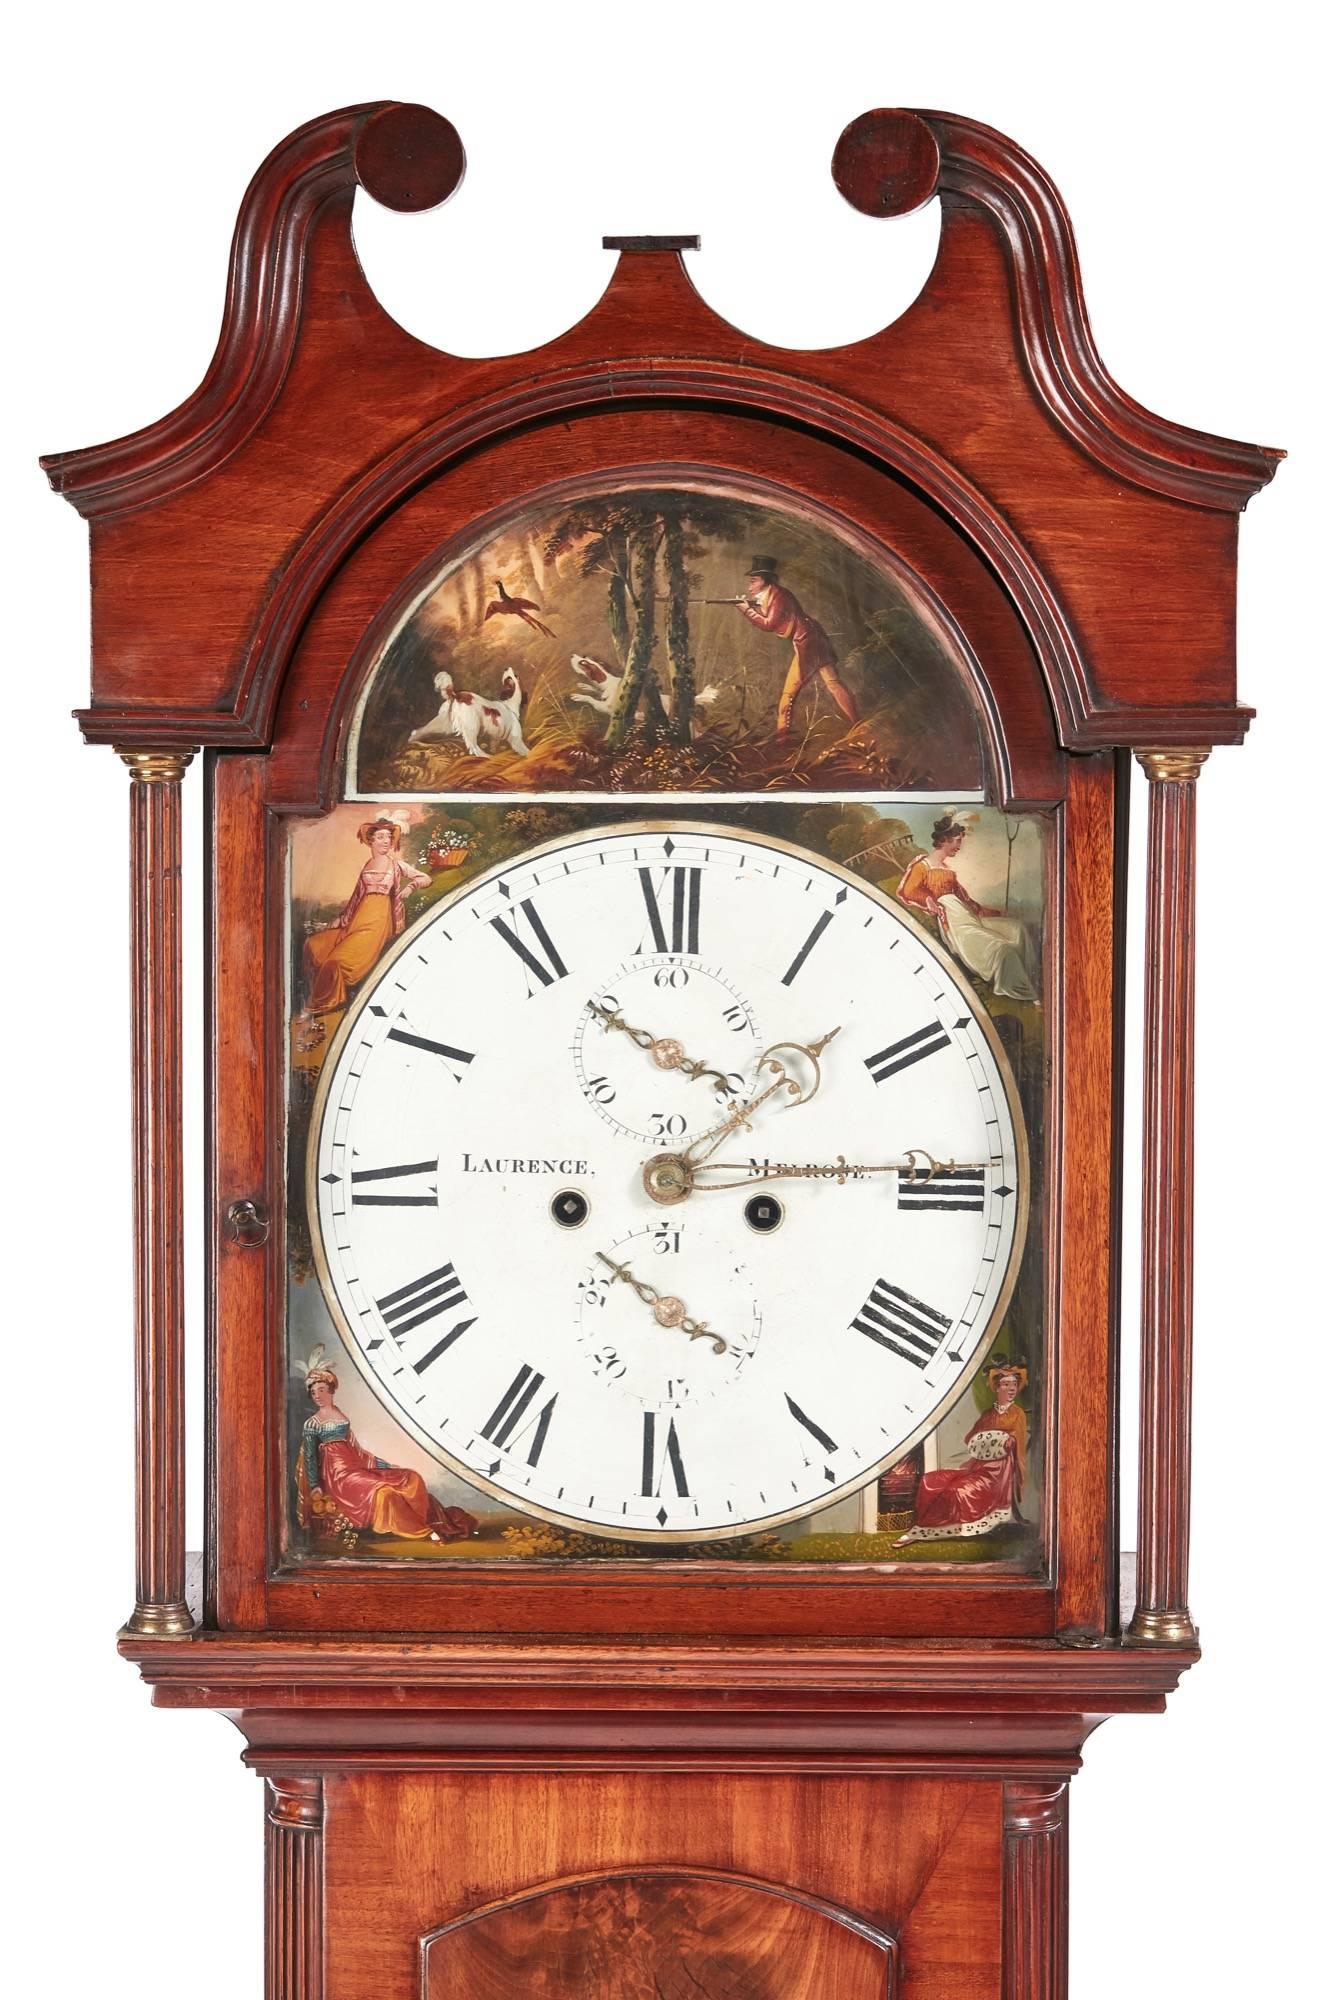 George III mahogany 8 day longcase clock, the hood with swan neck pediment, lovely decorative and colorful painted dial with date and seconds dial, 8 day duration mechanism striking the hour on the bell, lovely flame mahogany case standing on a